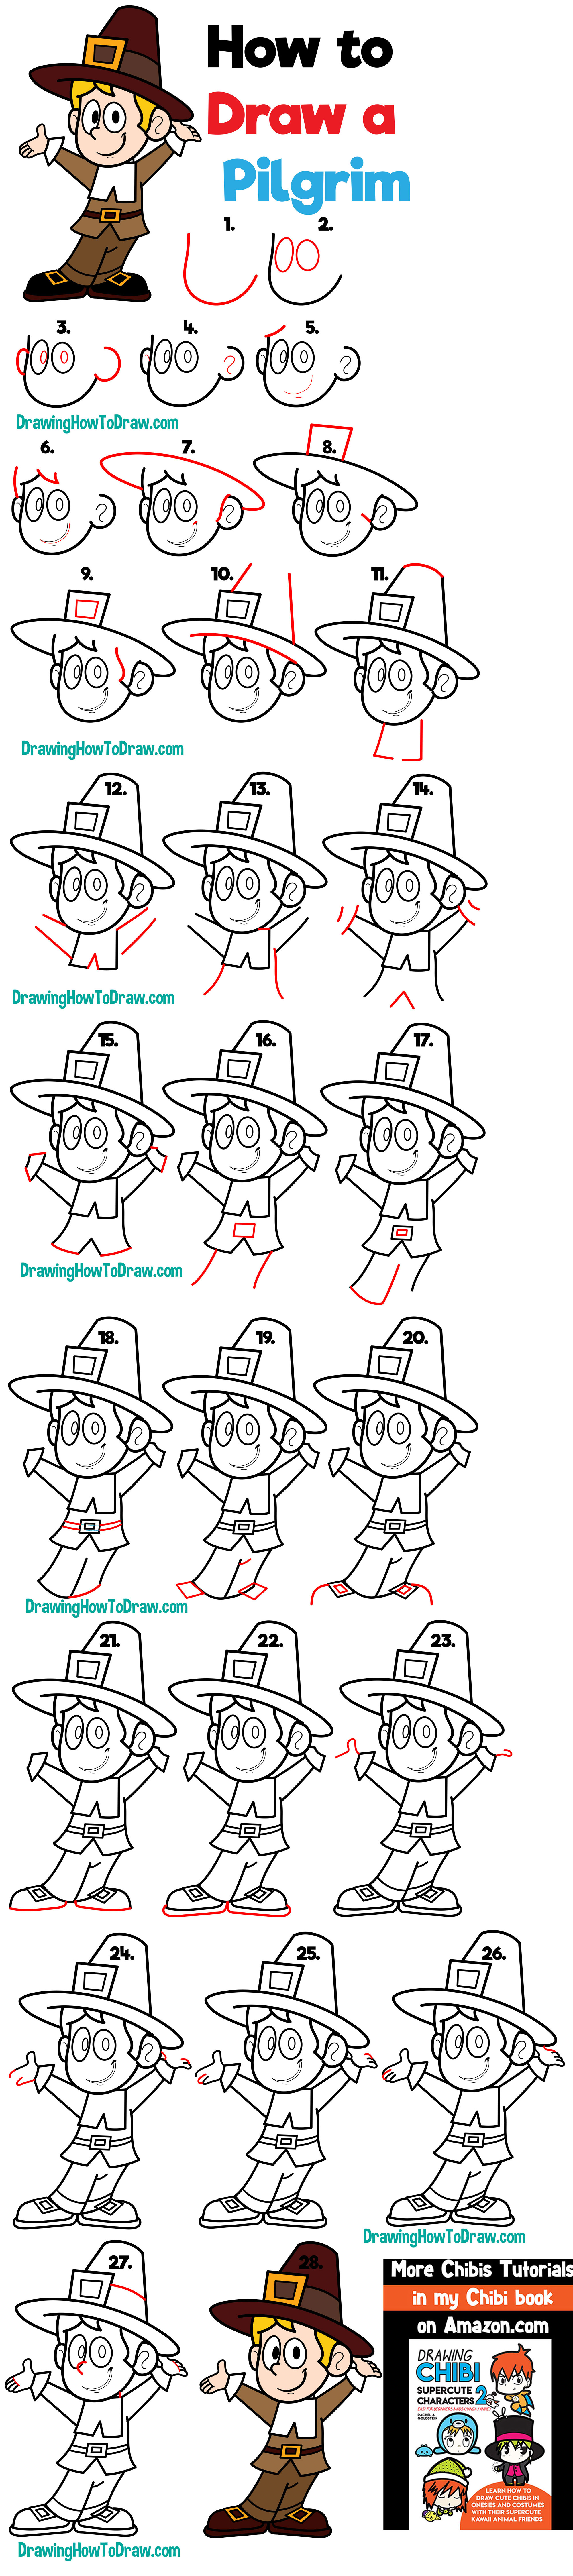 Today I'll show you how to draw a cute cartoon pilgrim for Thanksgiving. This cartoon pilgrim is pretty easy to draw and looks great for your Thanksgiving decorations. I will show you how to draw it with simple-to-follow steps.